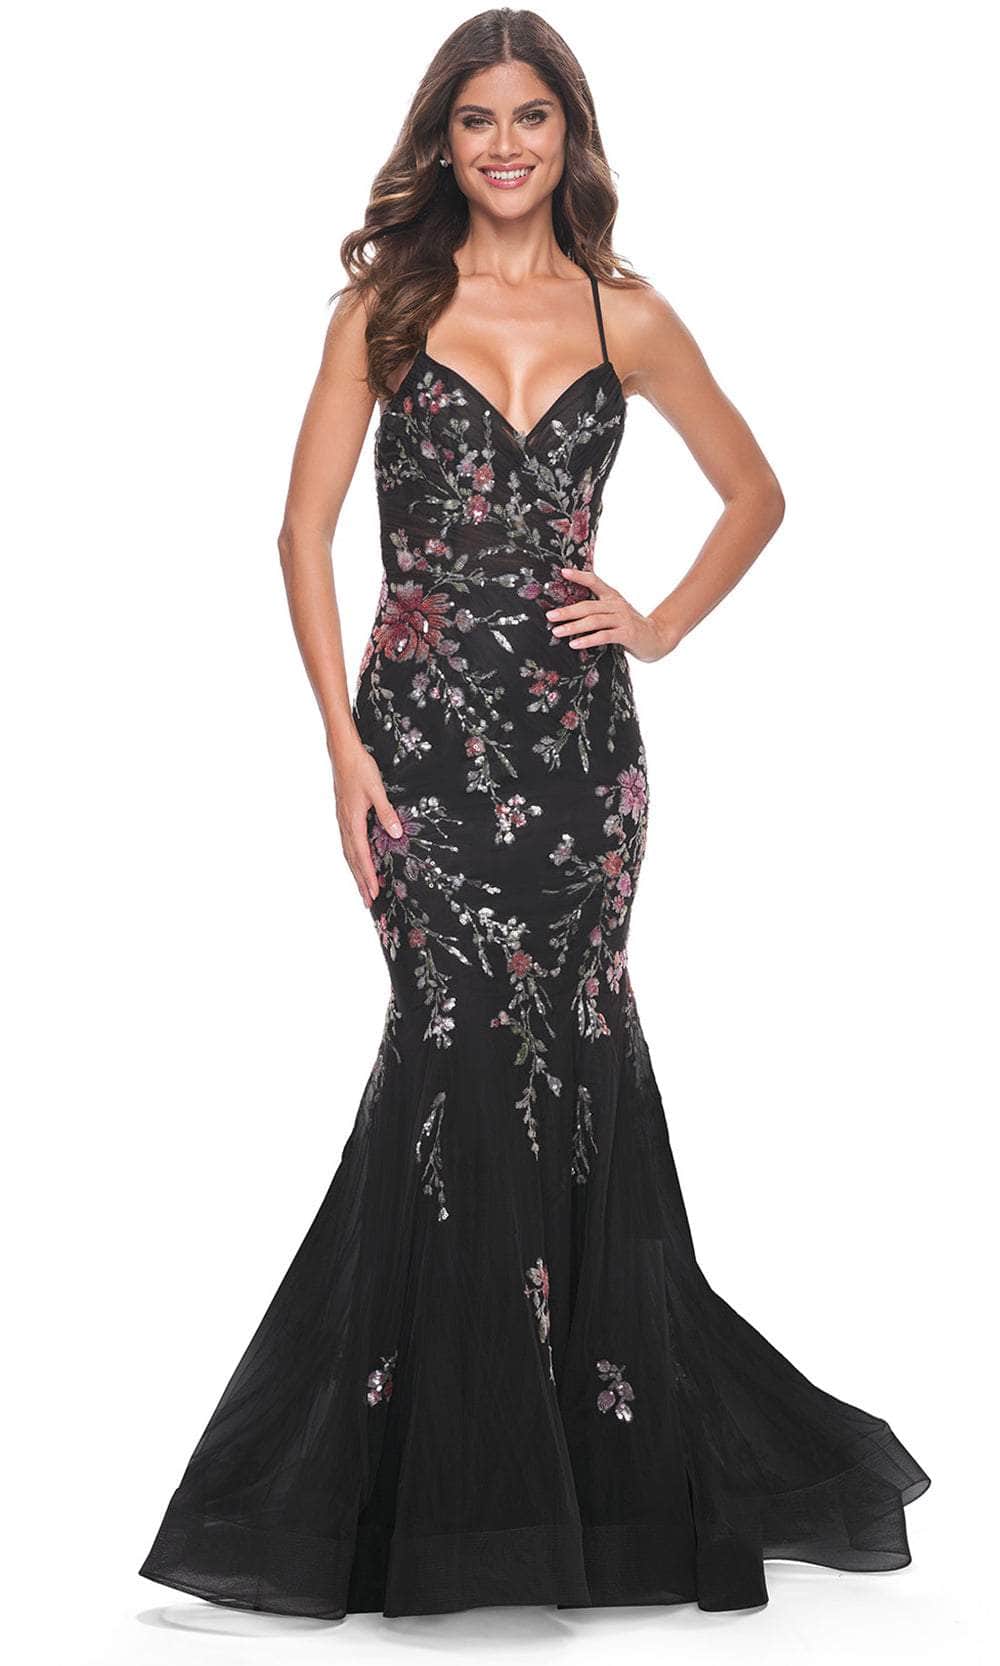 Image of La Femme 32246 - Lace-Up Back Mermaid Prom Gown